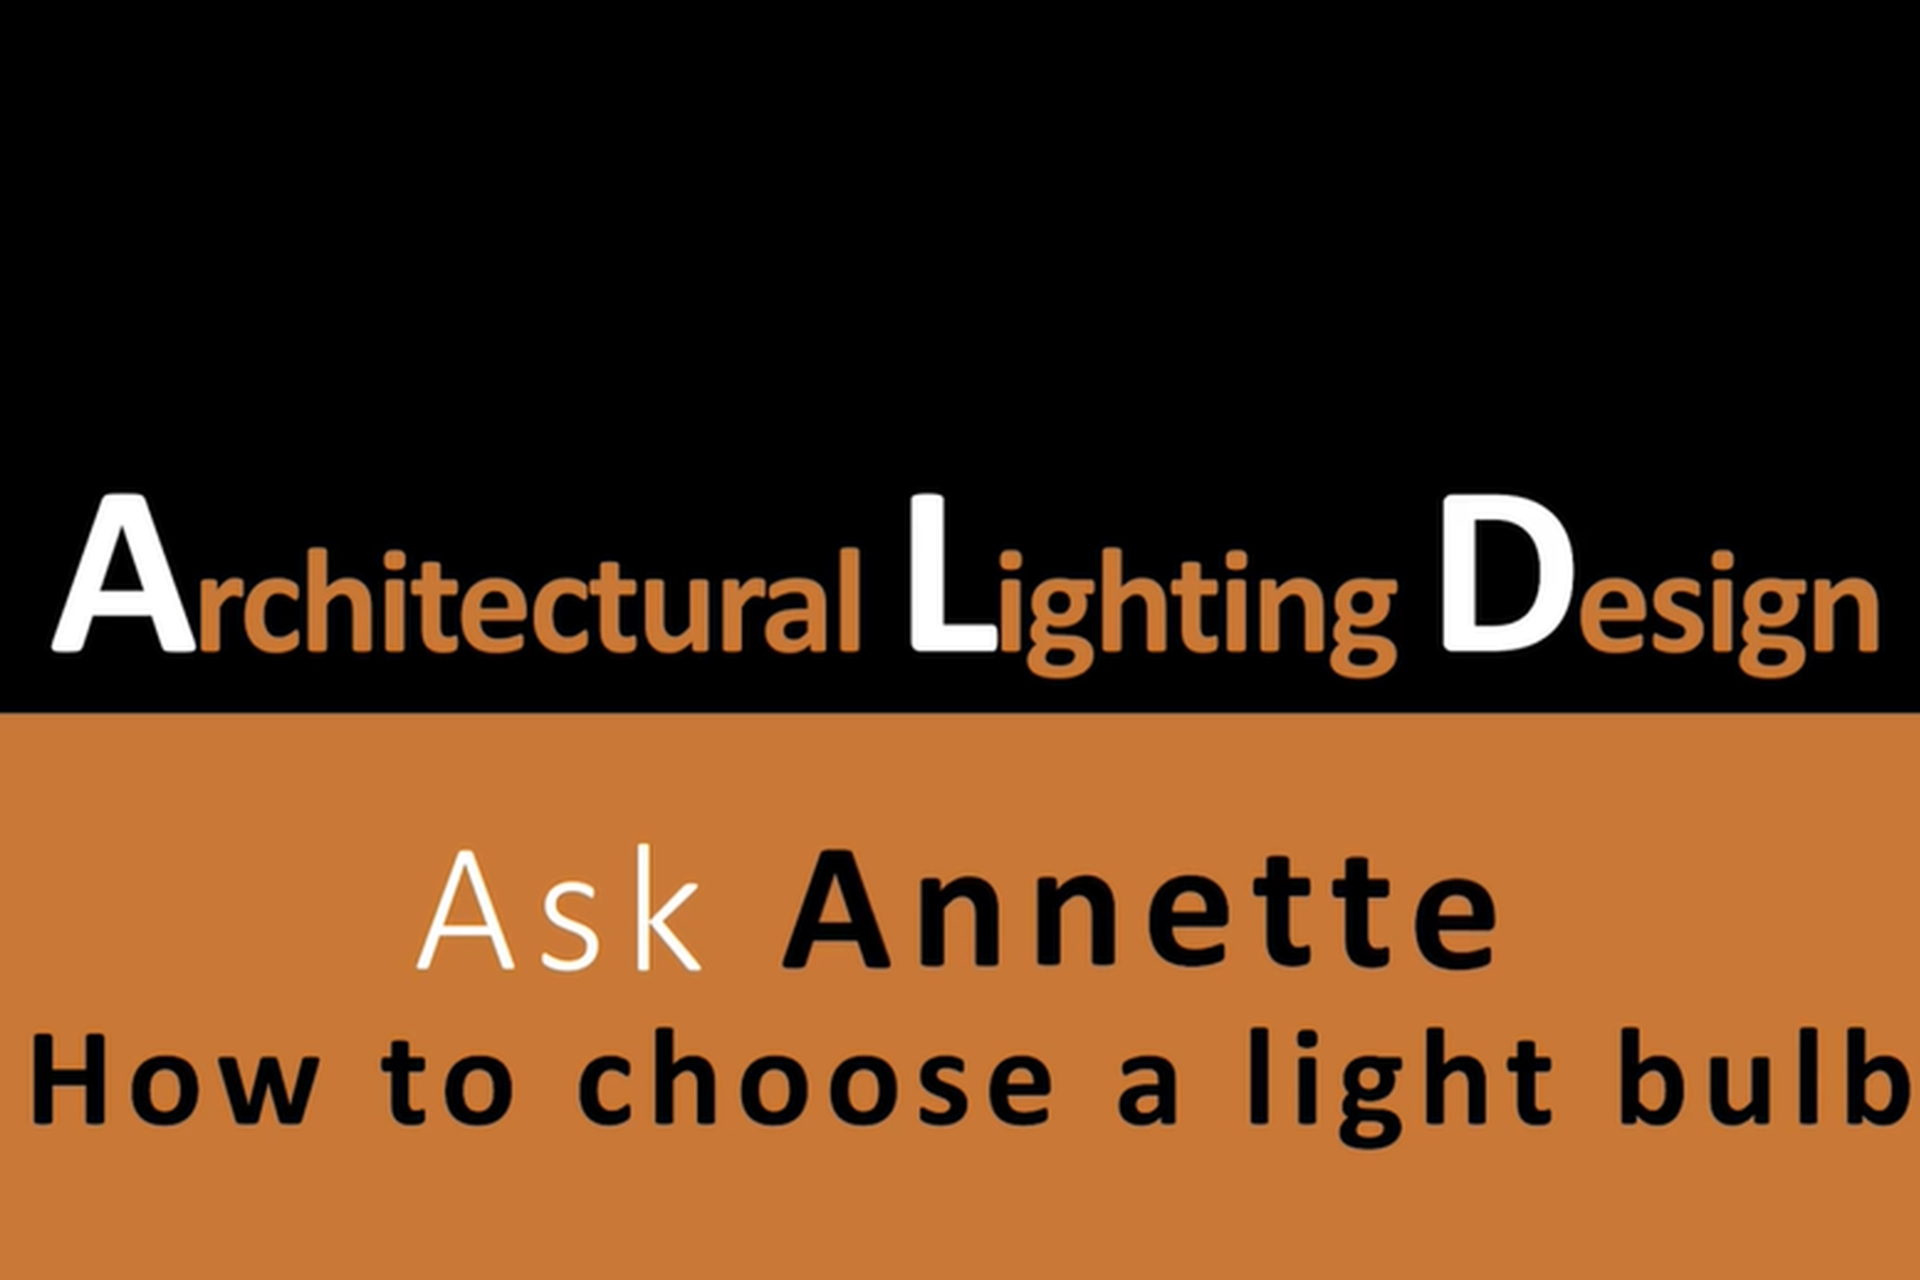 Annette Hladio, How to choose a light bulb